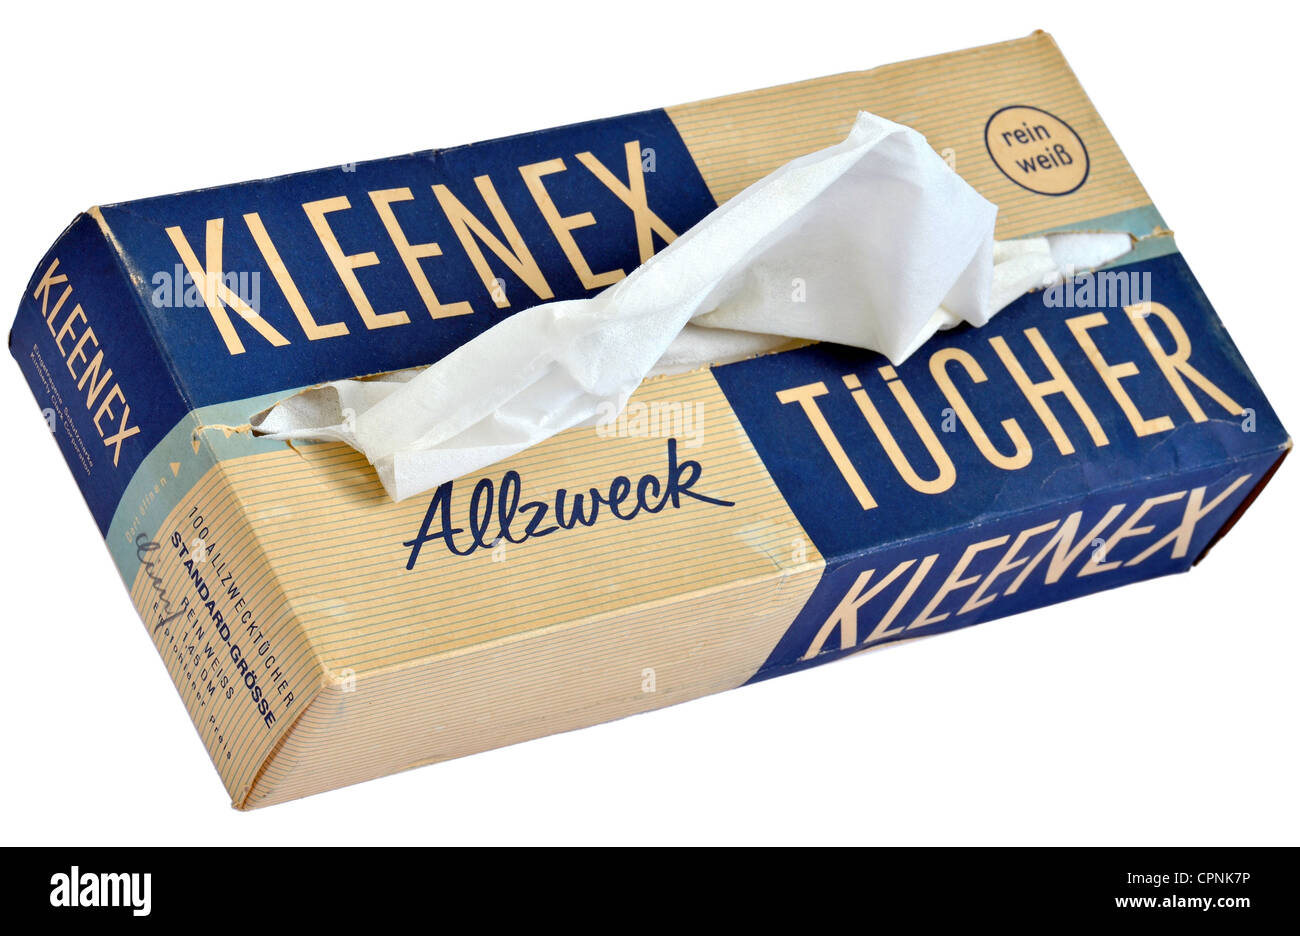 cosmetics, Kleenex tissues, 100 all-purpose tissue, made by the Zellwatte  GmbH Hamburg, former recommend retail price: 1.45 DM, Kimberly Clark  Corporation, dispenser box, Germany, circa 1960,  Additional-Rights-Clearences-Not Available Stock Photo - Alamy